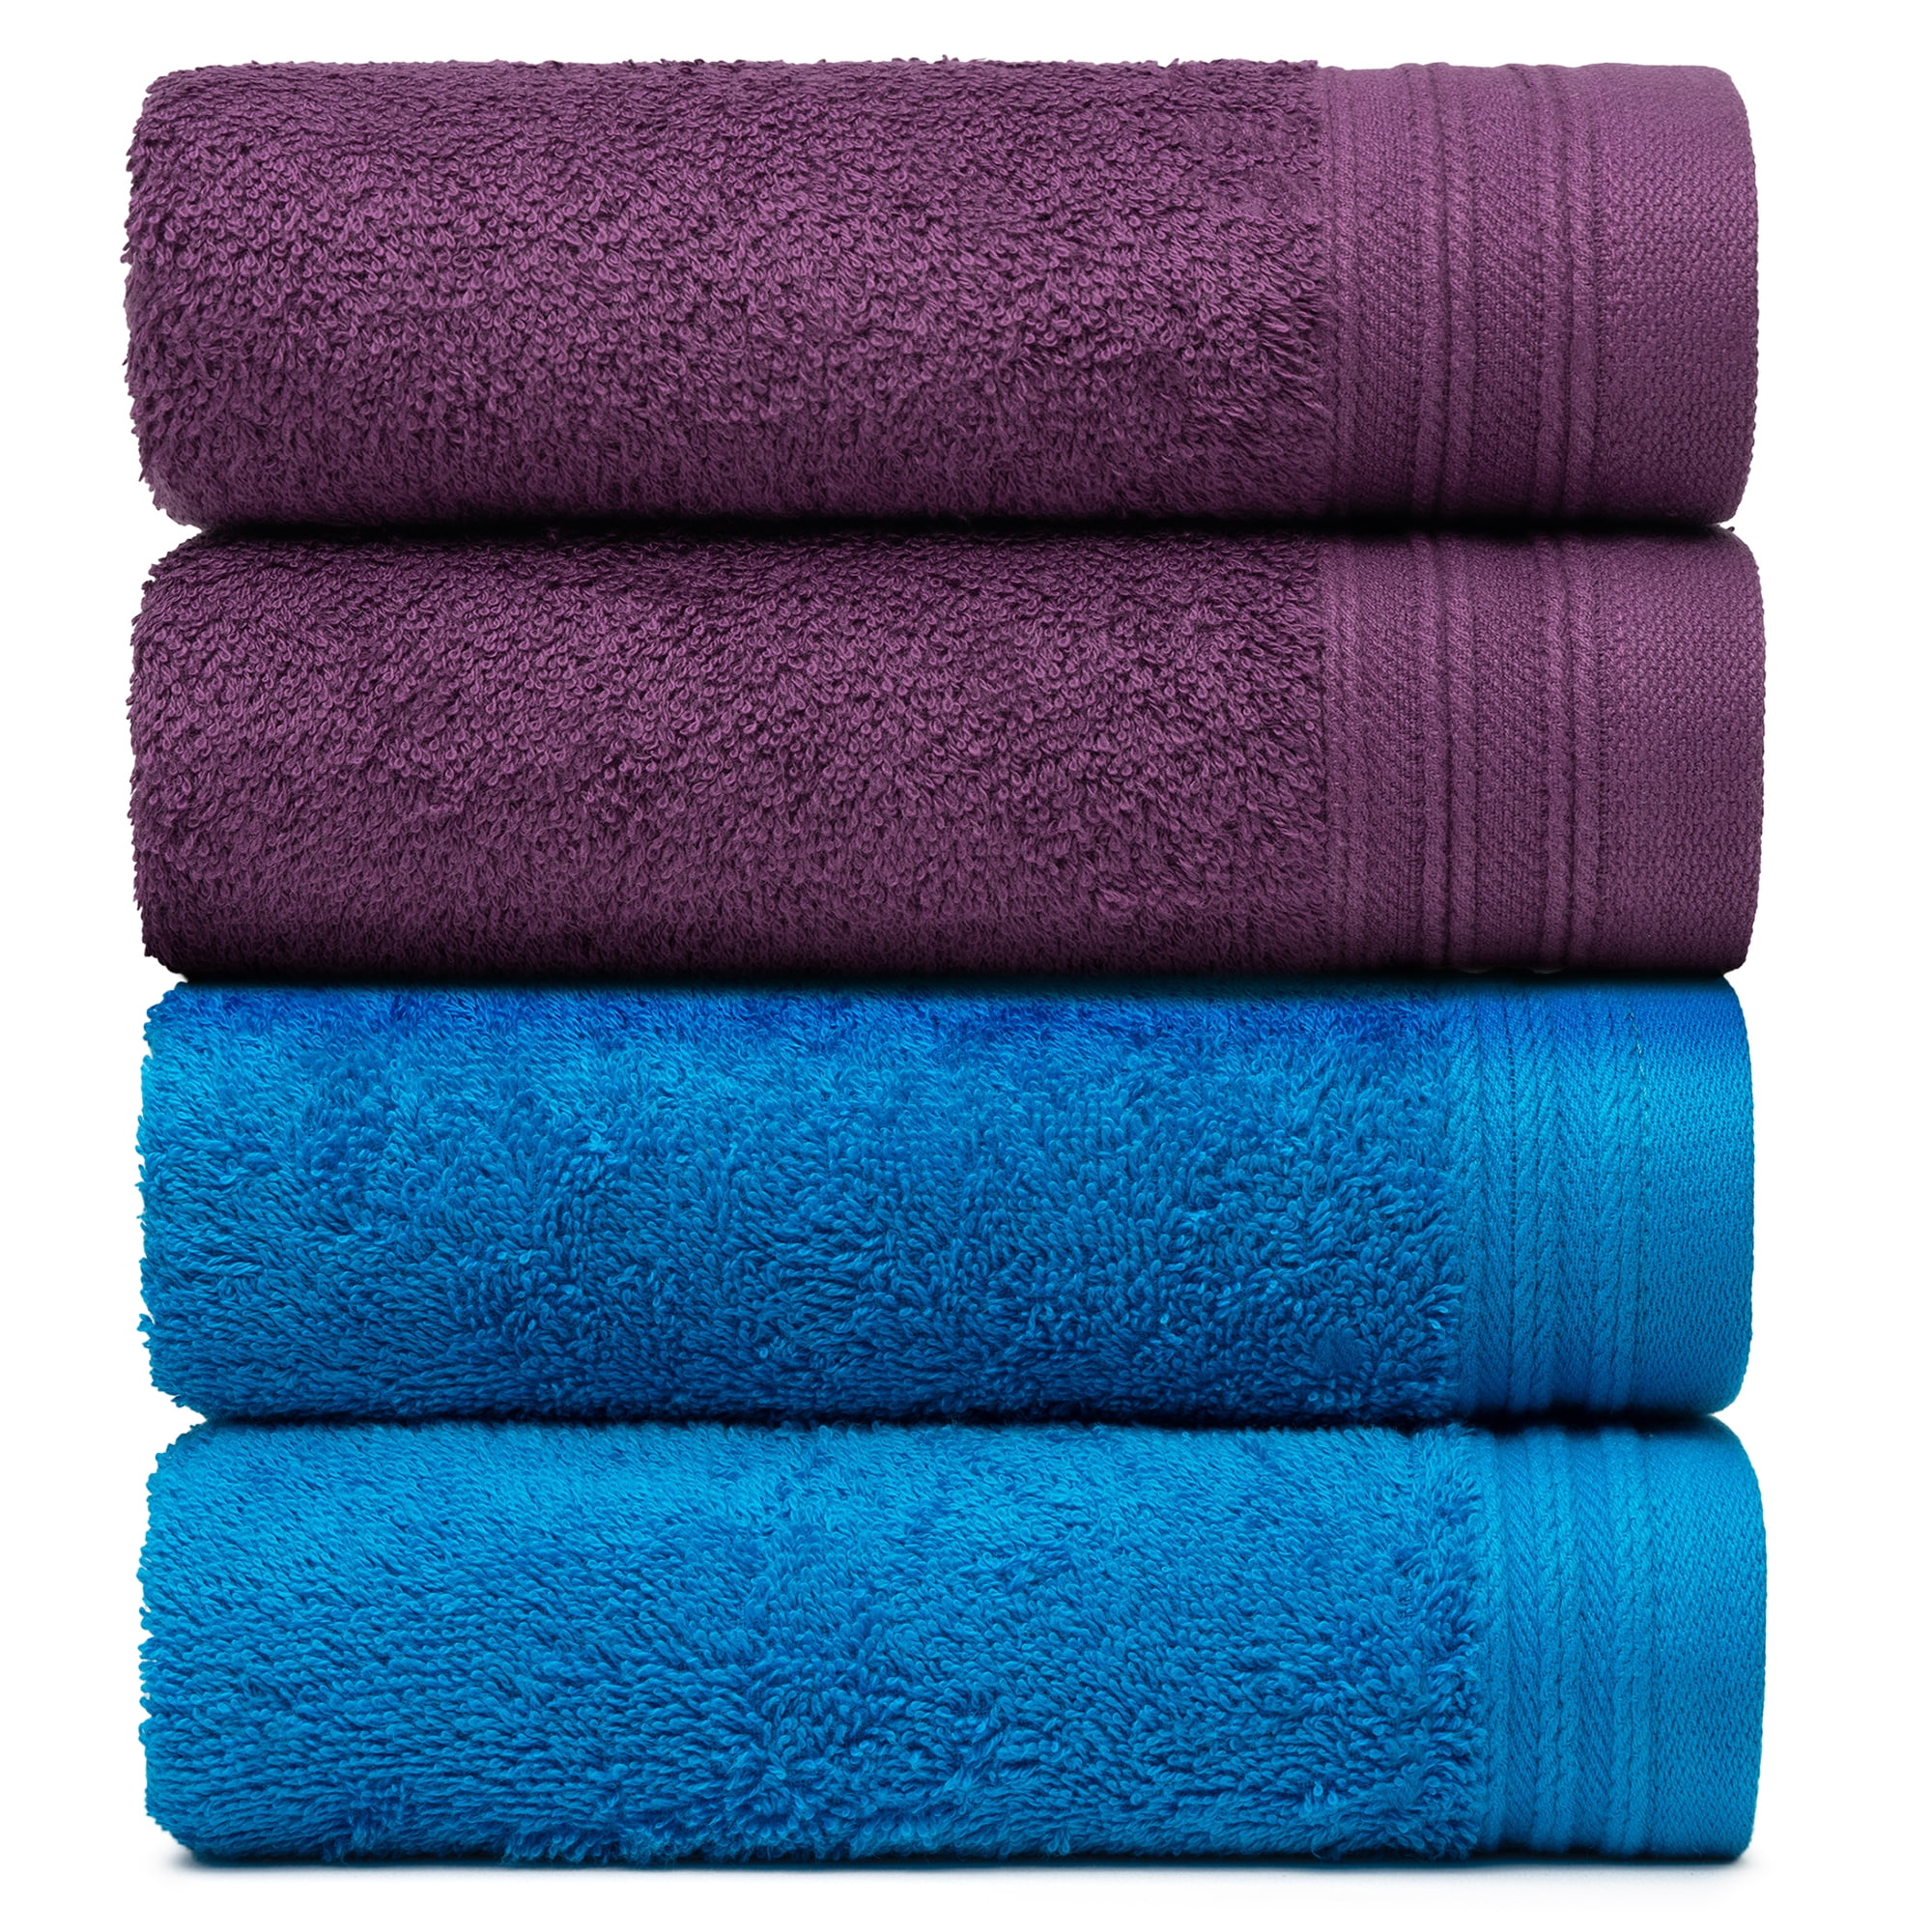 Weidemans Premium Towel Set of 4 Hand Towels 18 x 30 Color: Apple Green and Petrol |100% Cotton|4 Ultra Soft and Highly Absorbent Hand Towels for